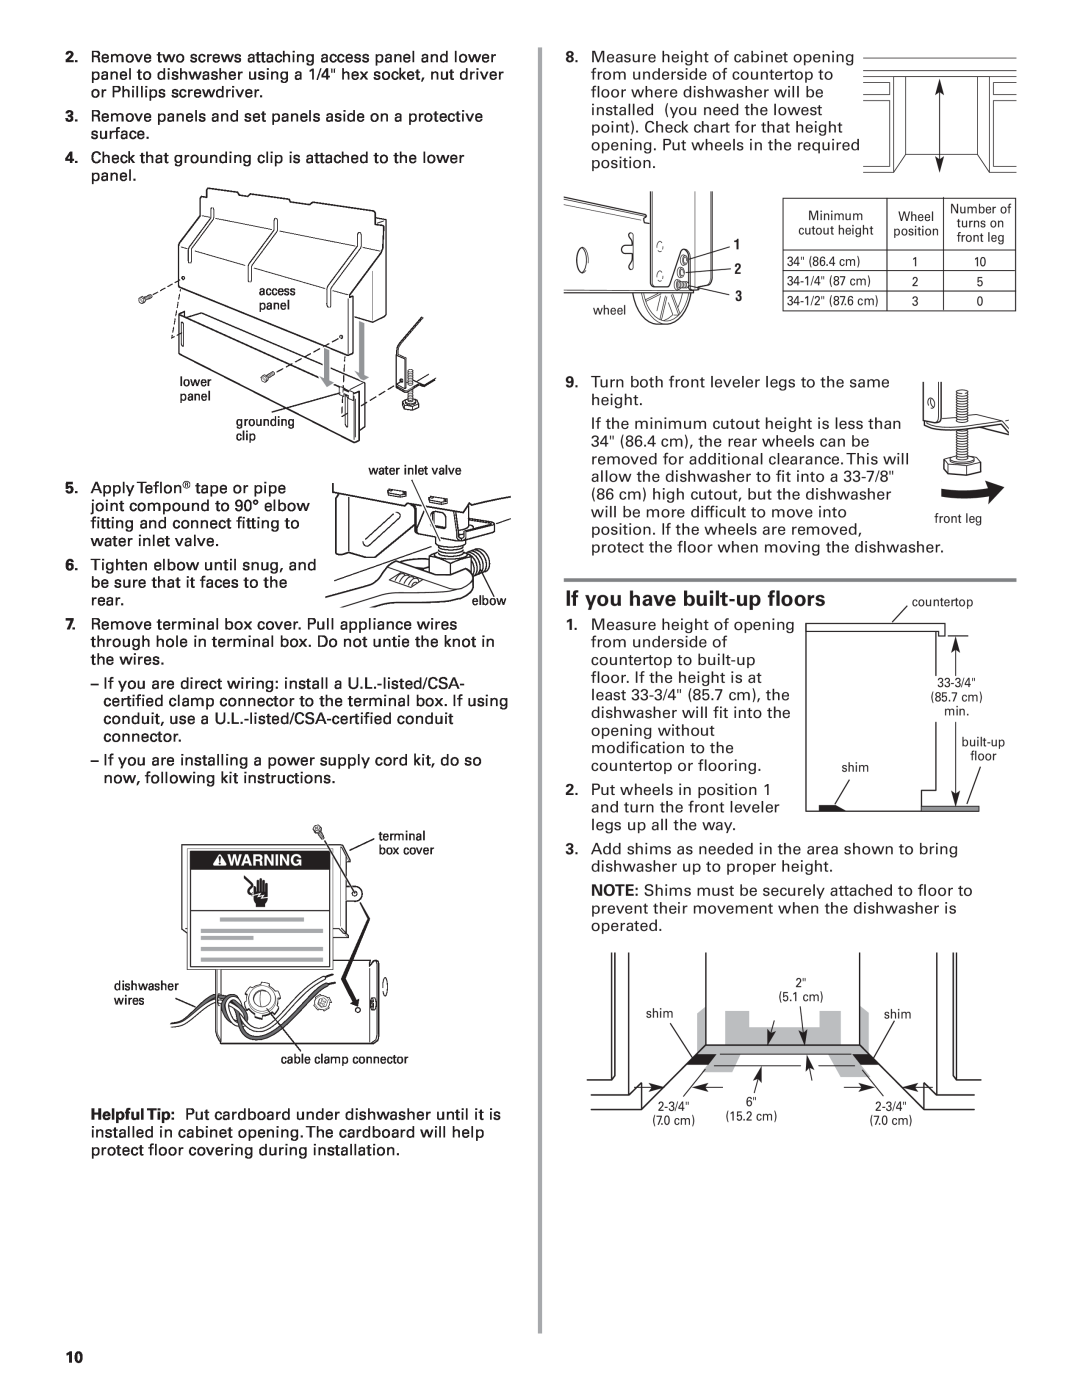 KitchenAid 8564554 installation instructions If you have built-up floors 